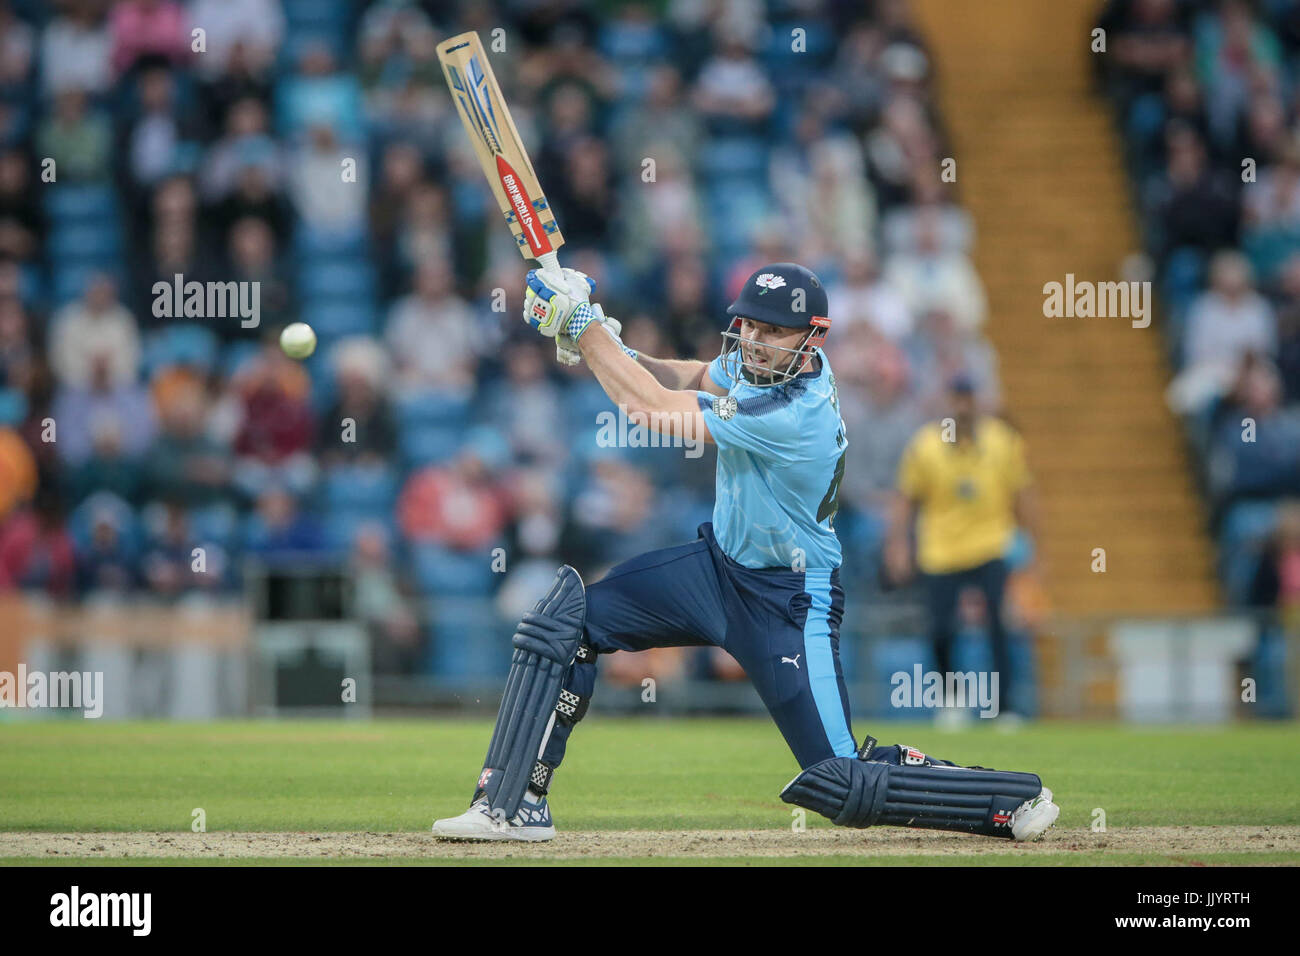 Shaun Marsh hits the ball into the outfield during the Natwest T20 Blast game between Yorkshire County Cricket Club v Warwickshire County Cricket Club on Friday 21 July 2017. Photo by Mark P Doherty. Stock Photo